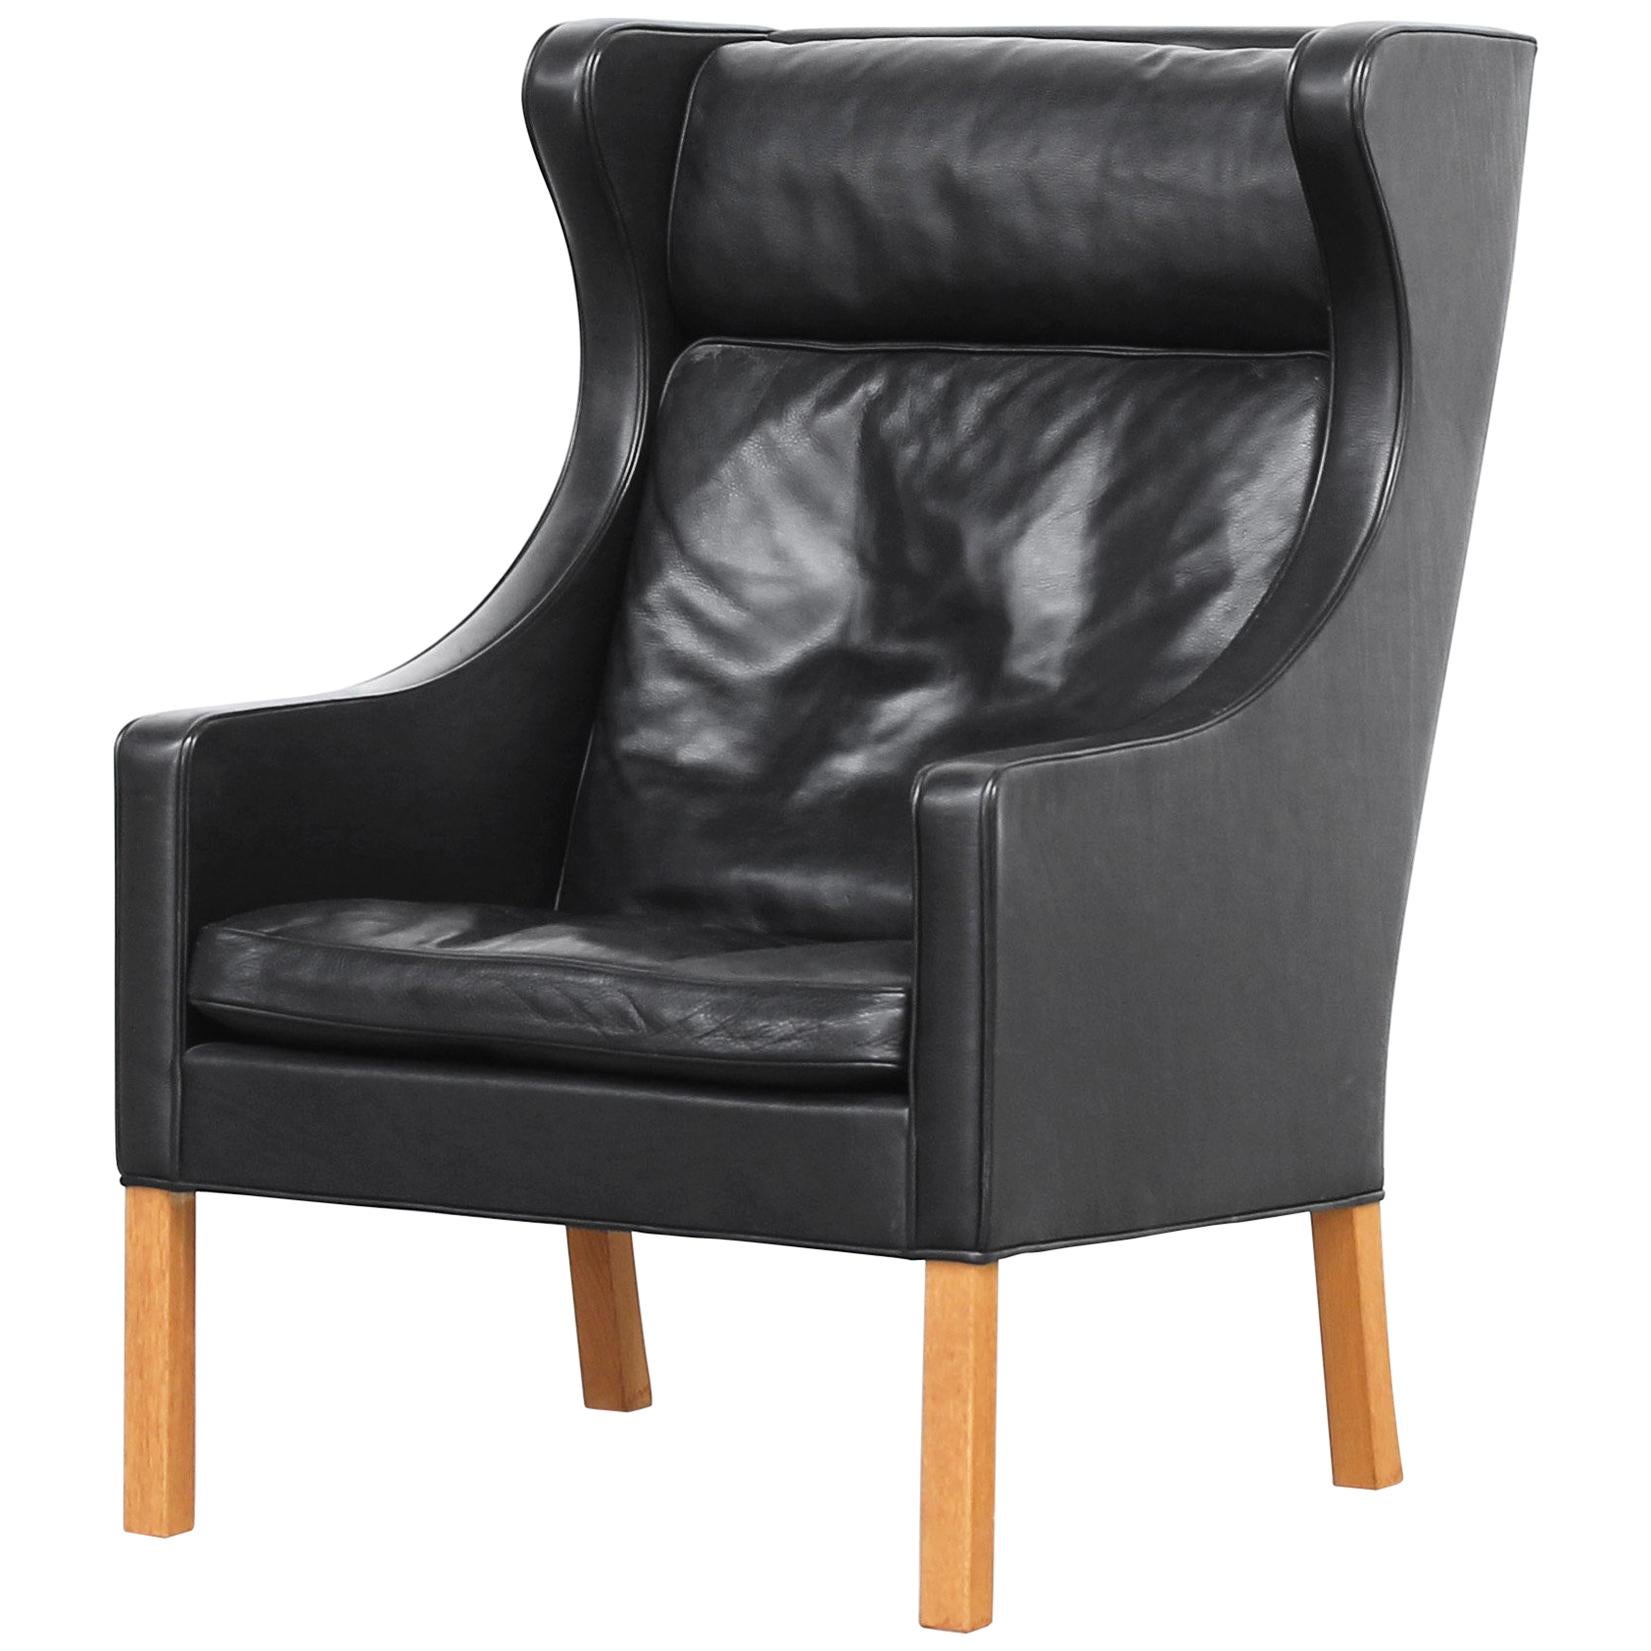 Lounge Wingback Chair 2204 by Børge Mogensen for Fredericia Stolefabrik